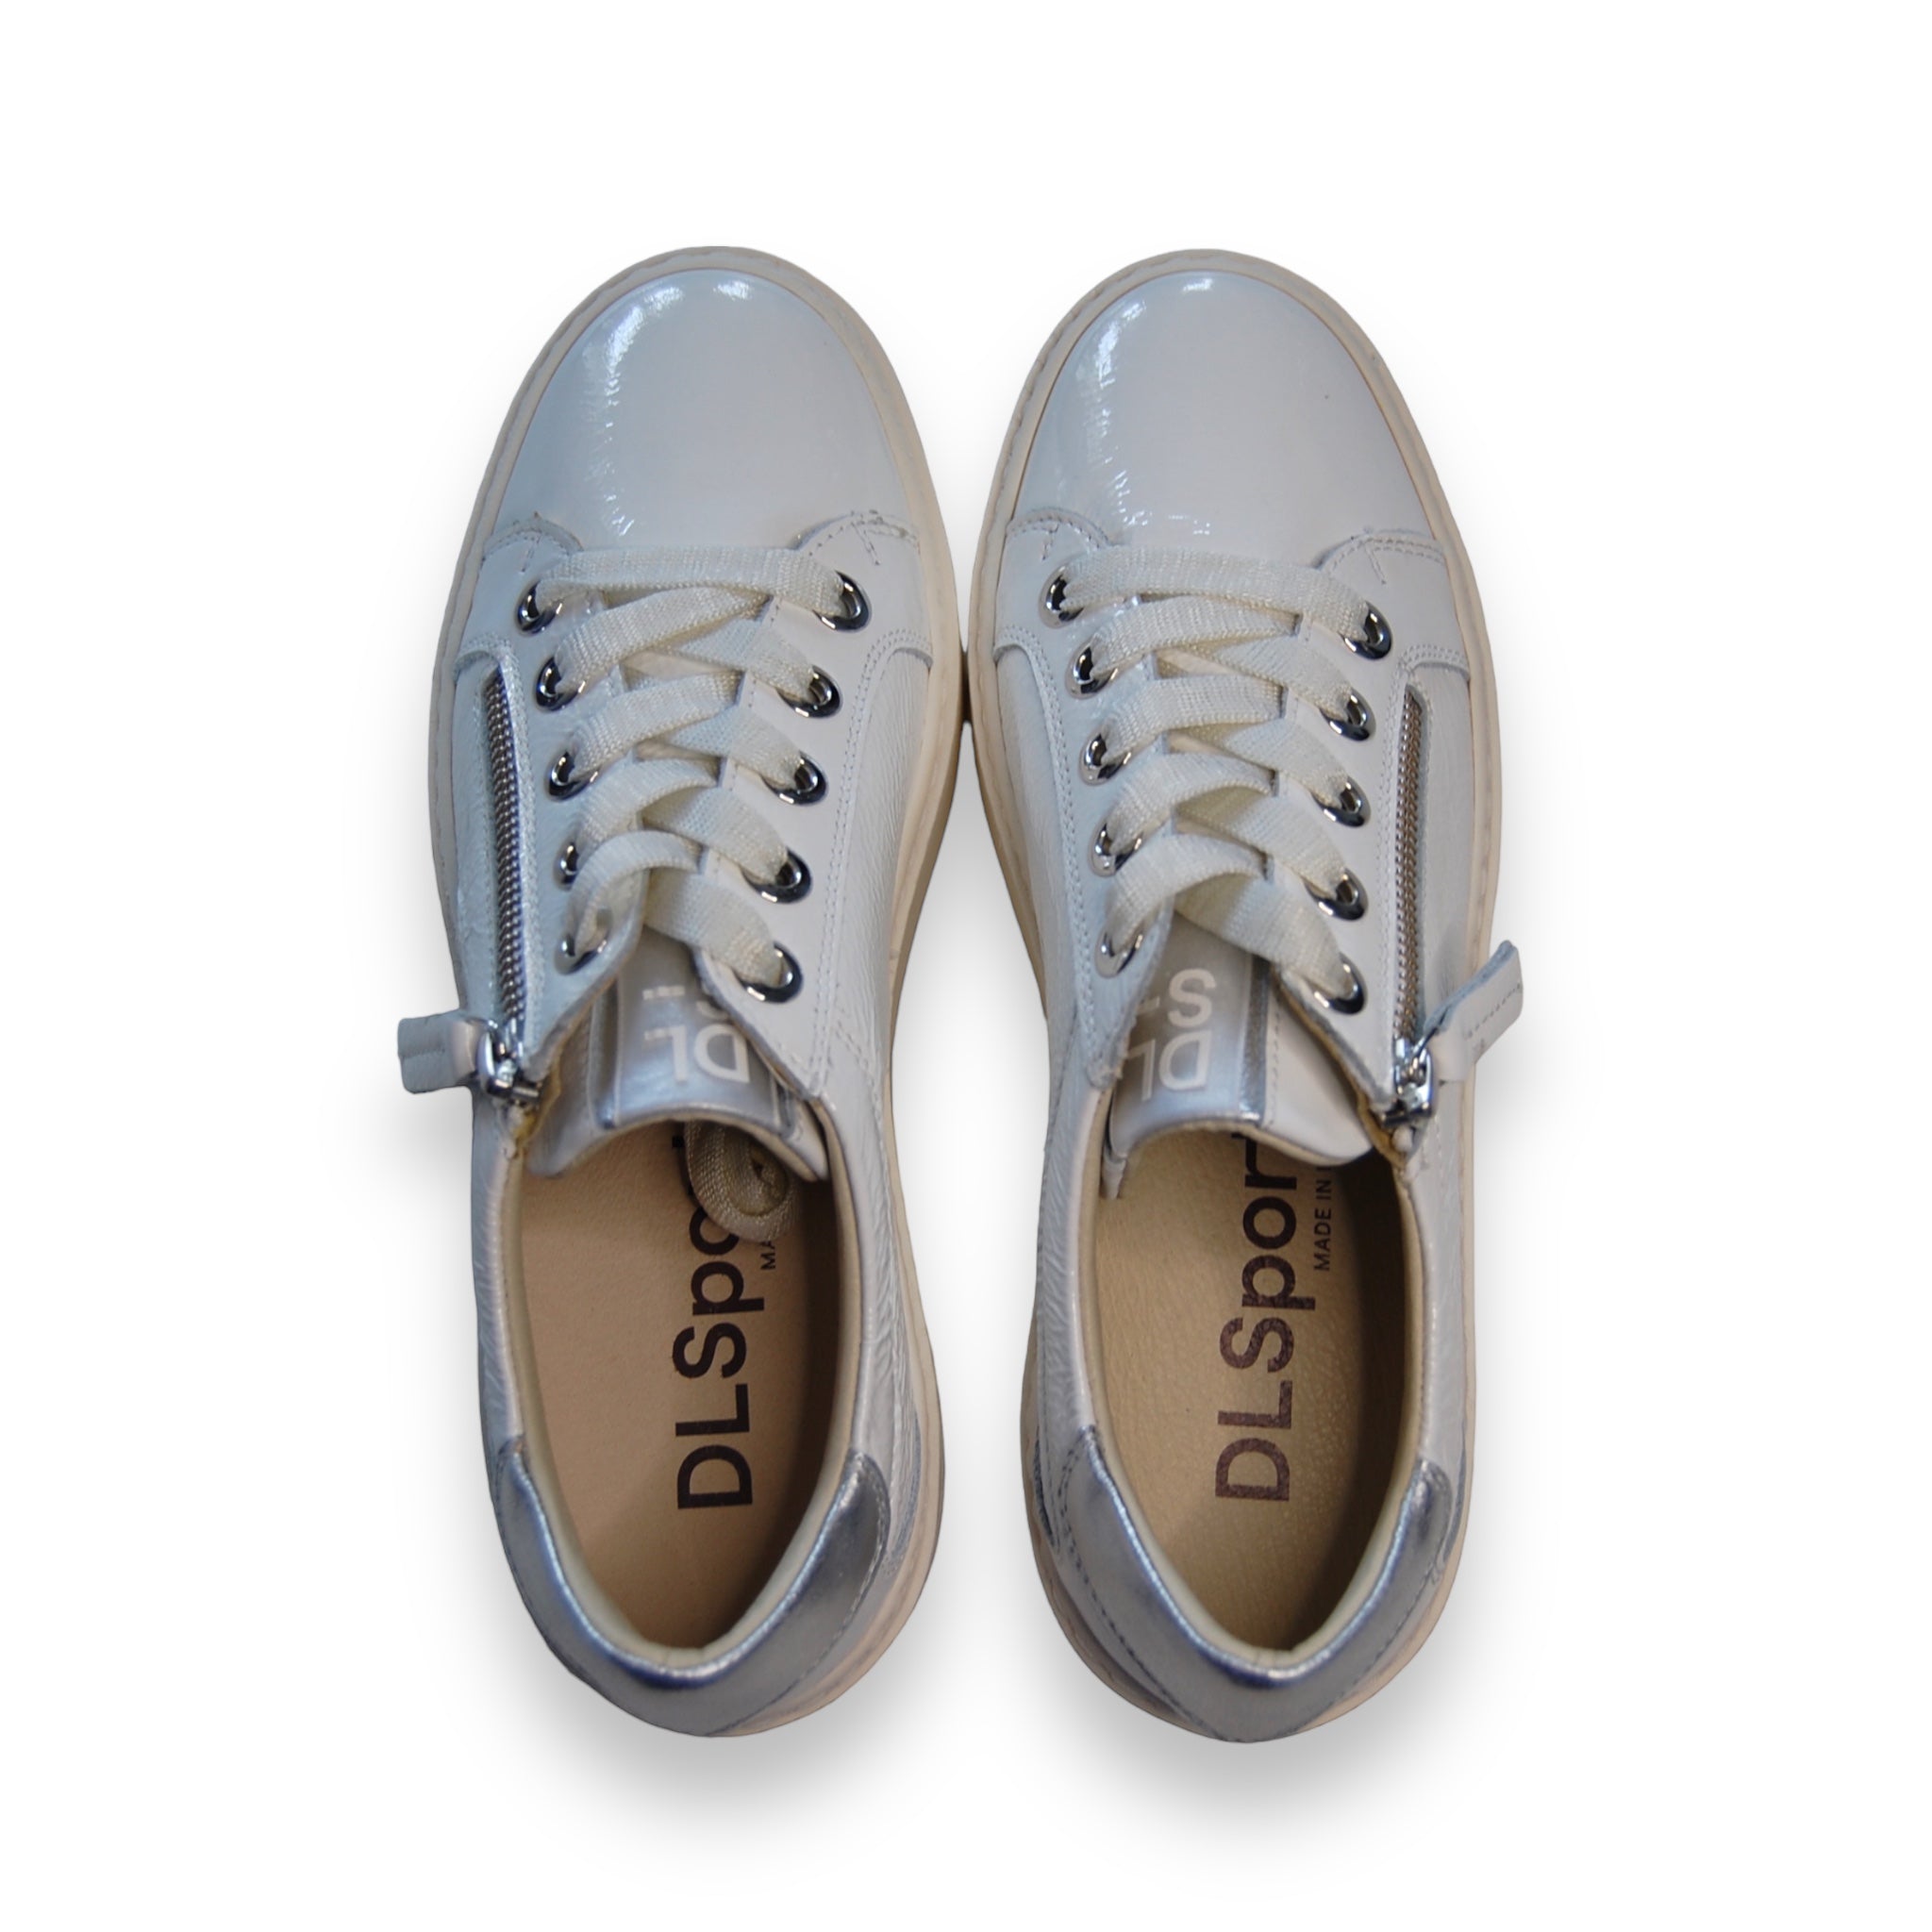 DL Sport Patent Leather Sneaker White 5607 Naplak Bianco V3 top view